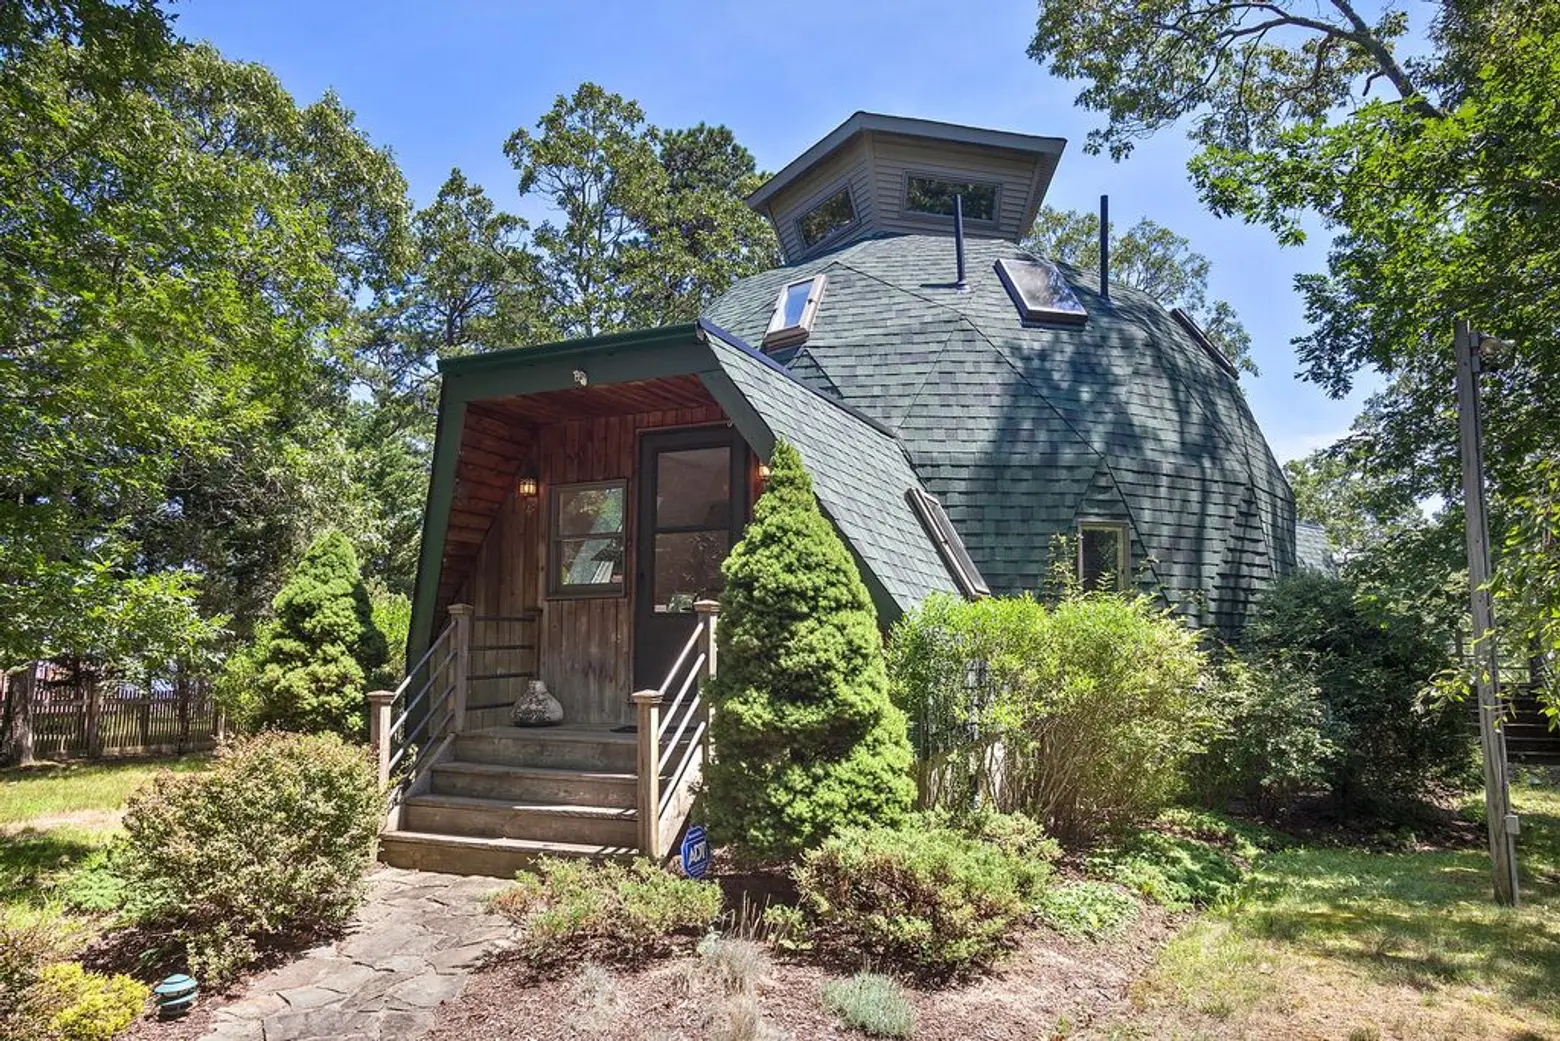 Live in a waterfront dome in Southampton for $729,000